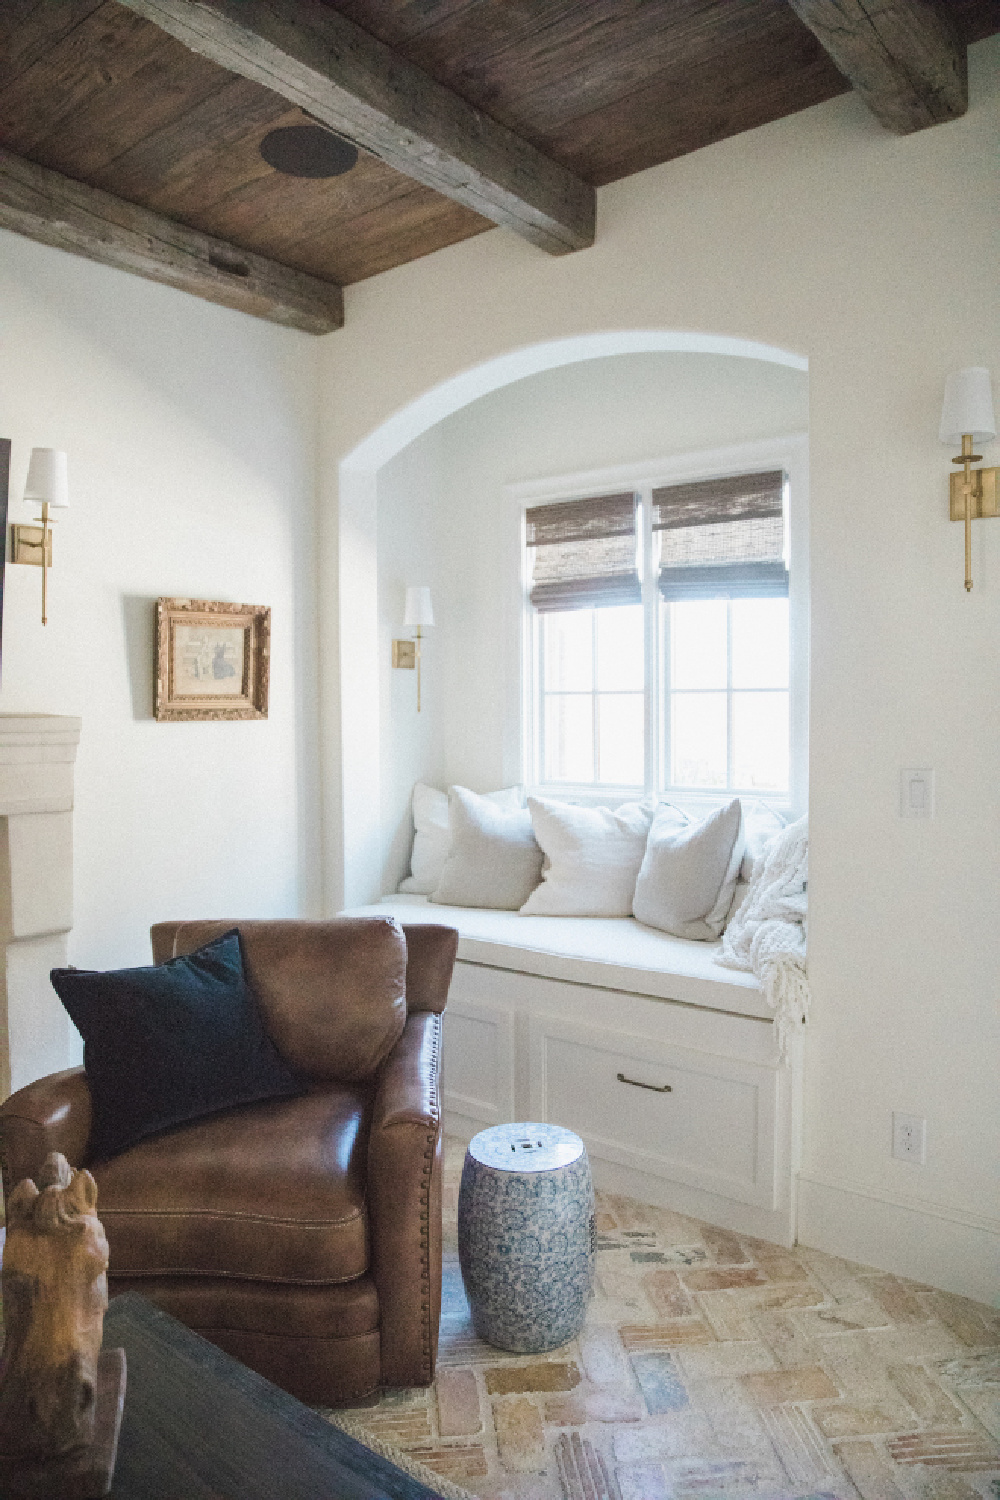 Arched window seat nook with storage beneath in a beautiful French country new build home - Brit Jones.